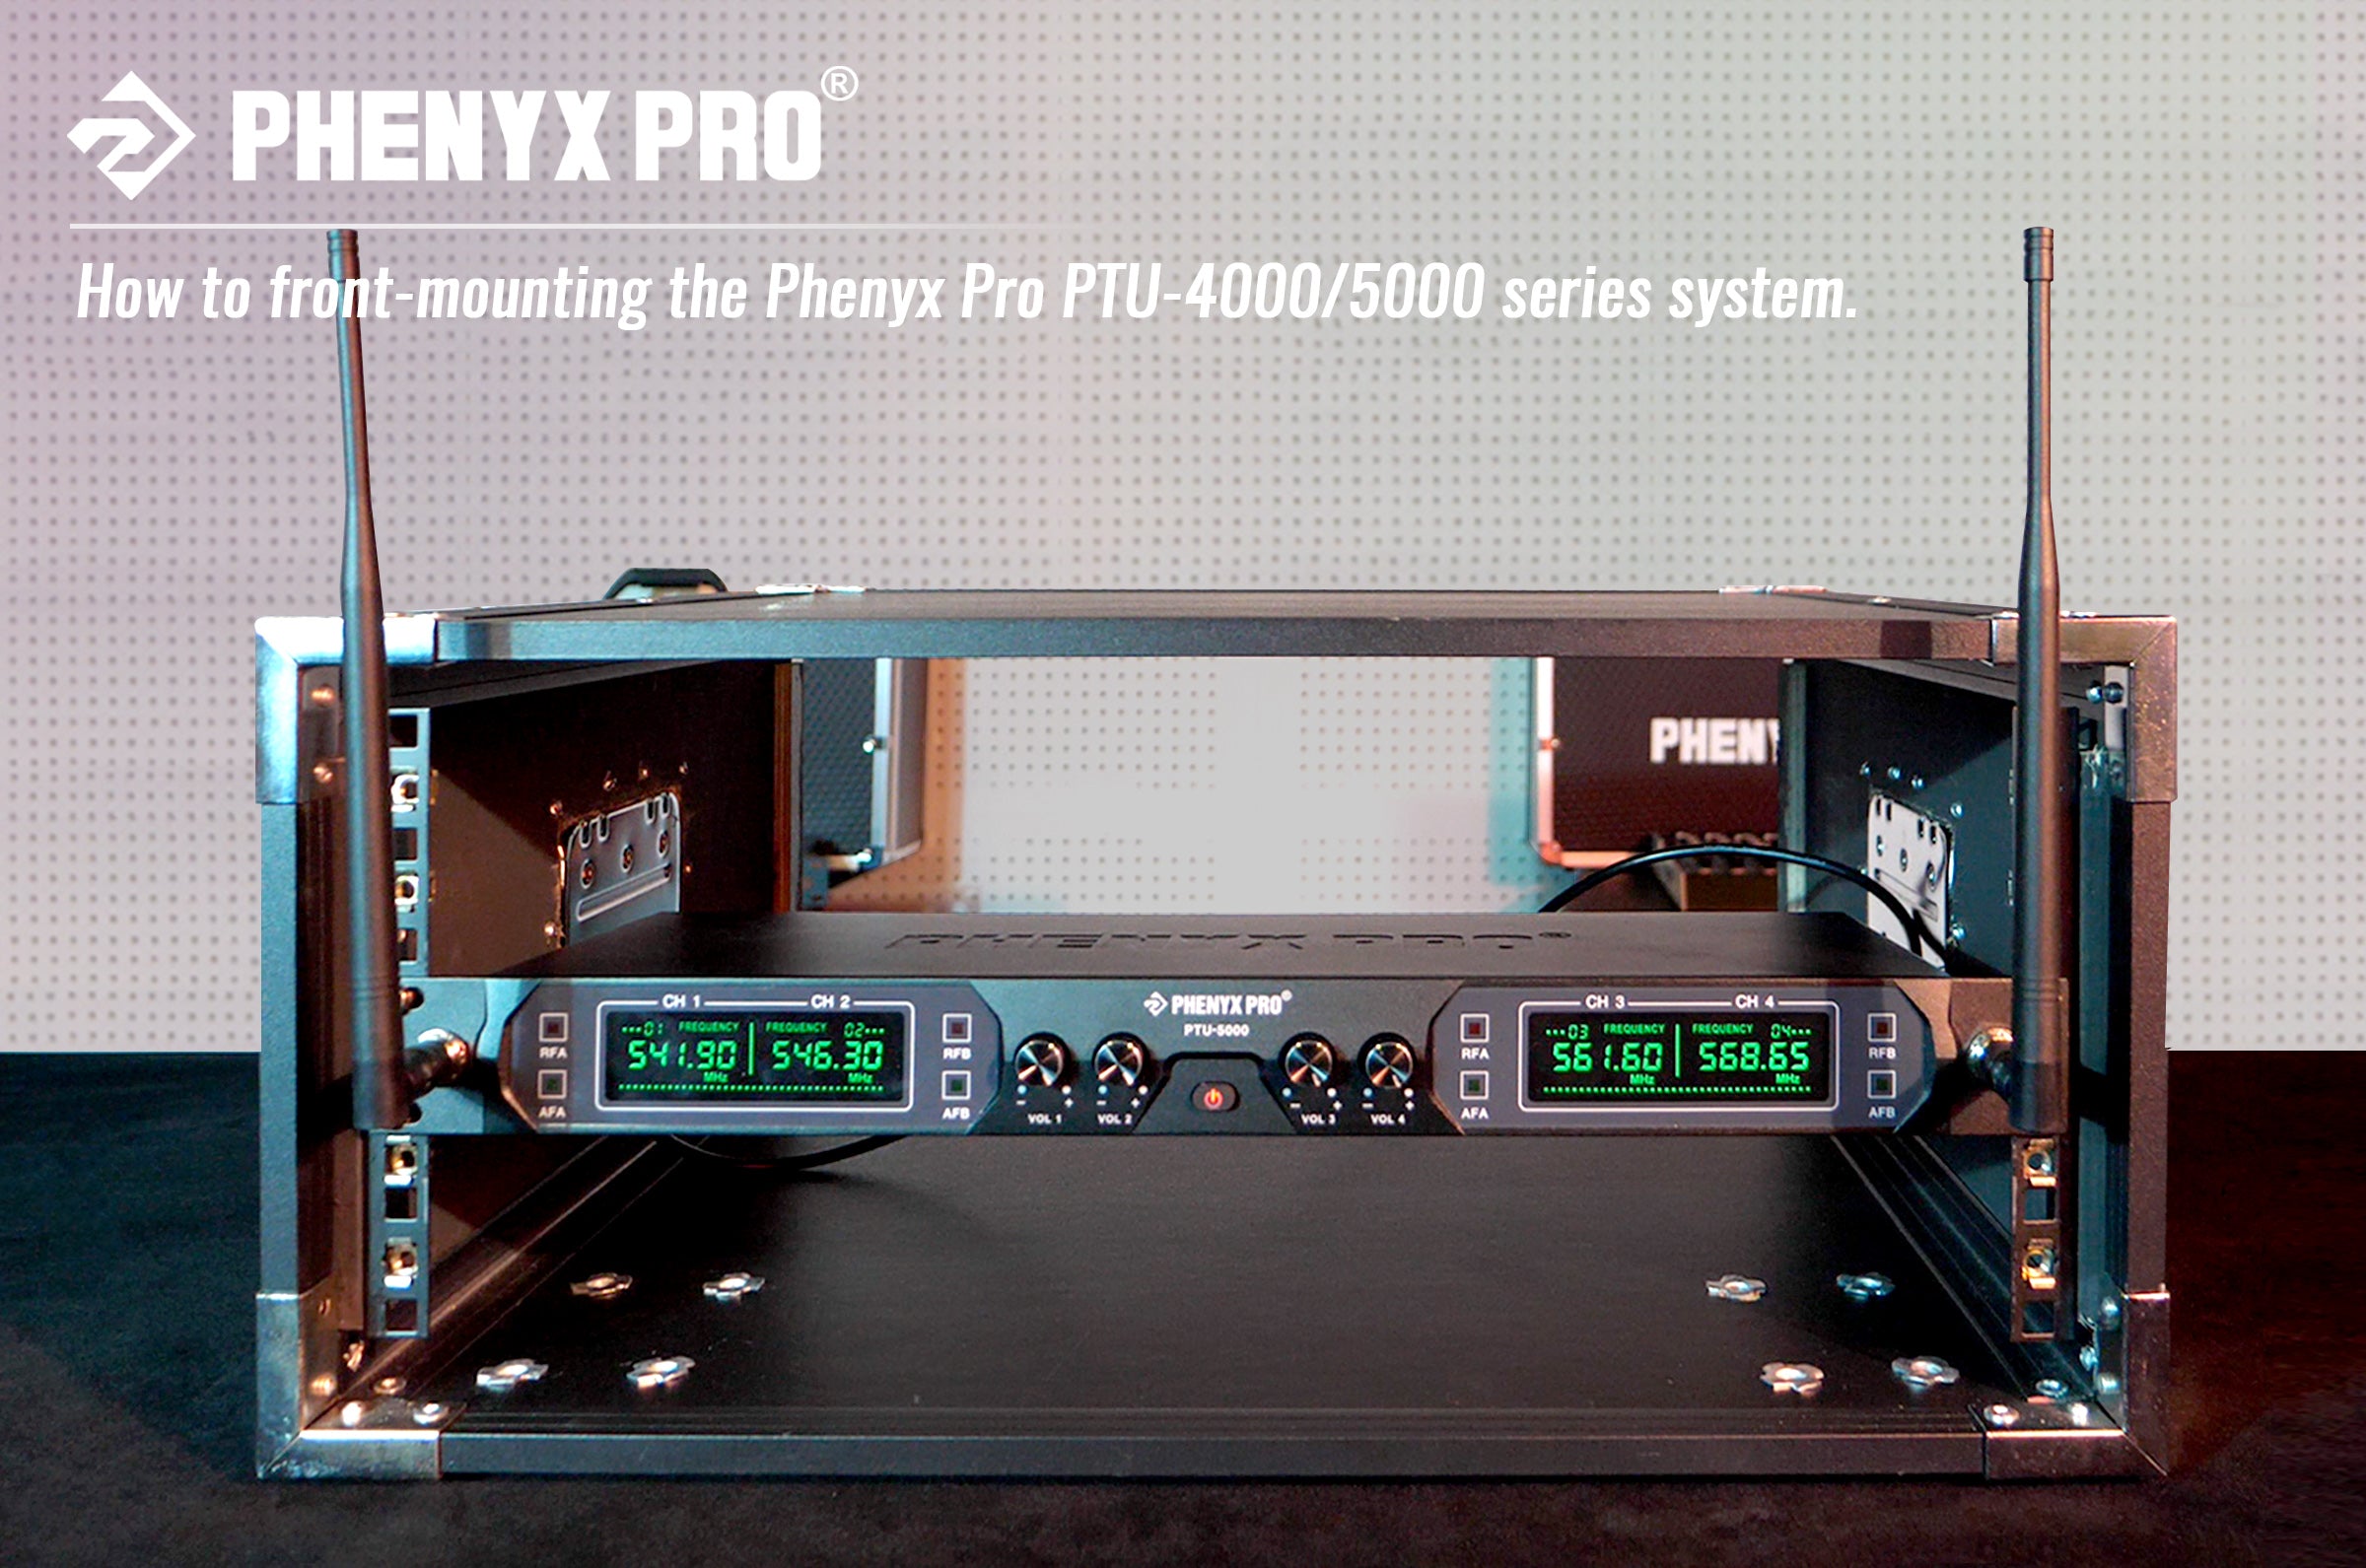 Guide to rack mount the Phenyx Pro PTU-4000/5000 series system.